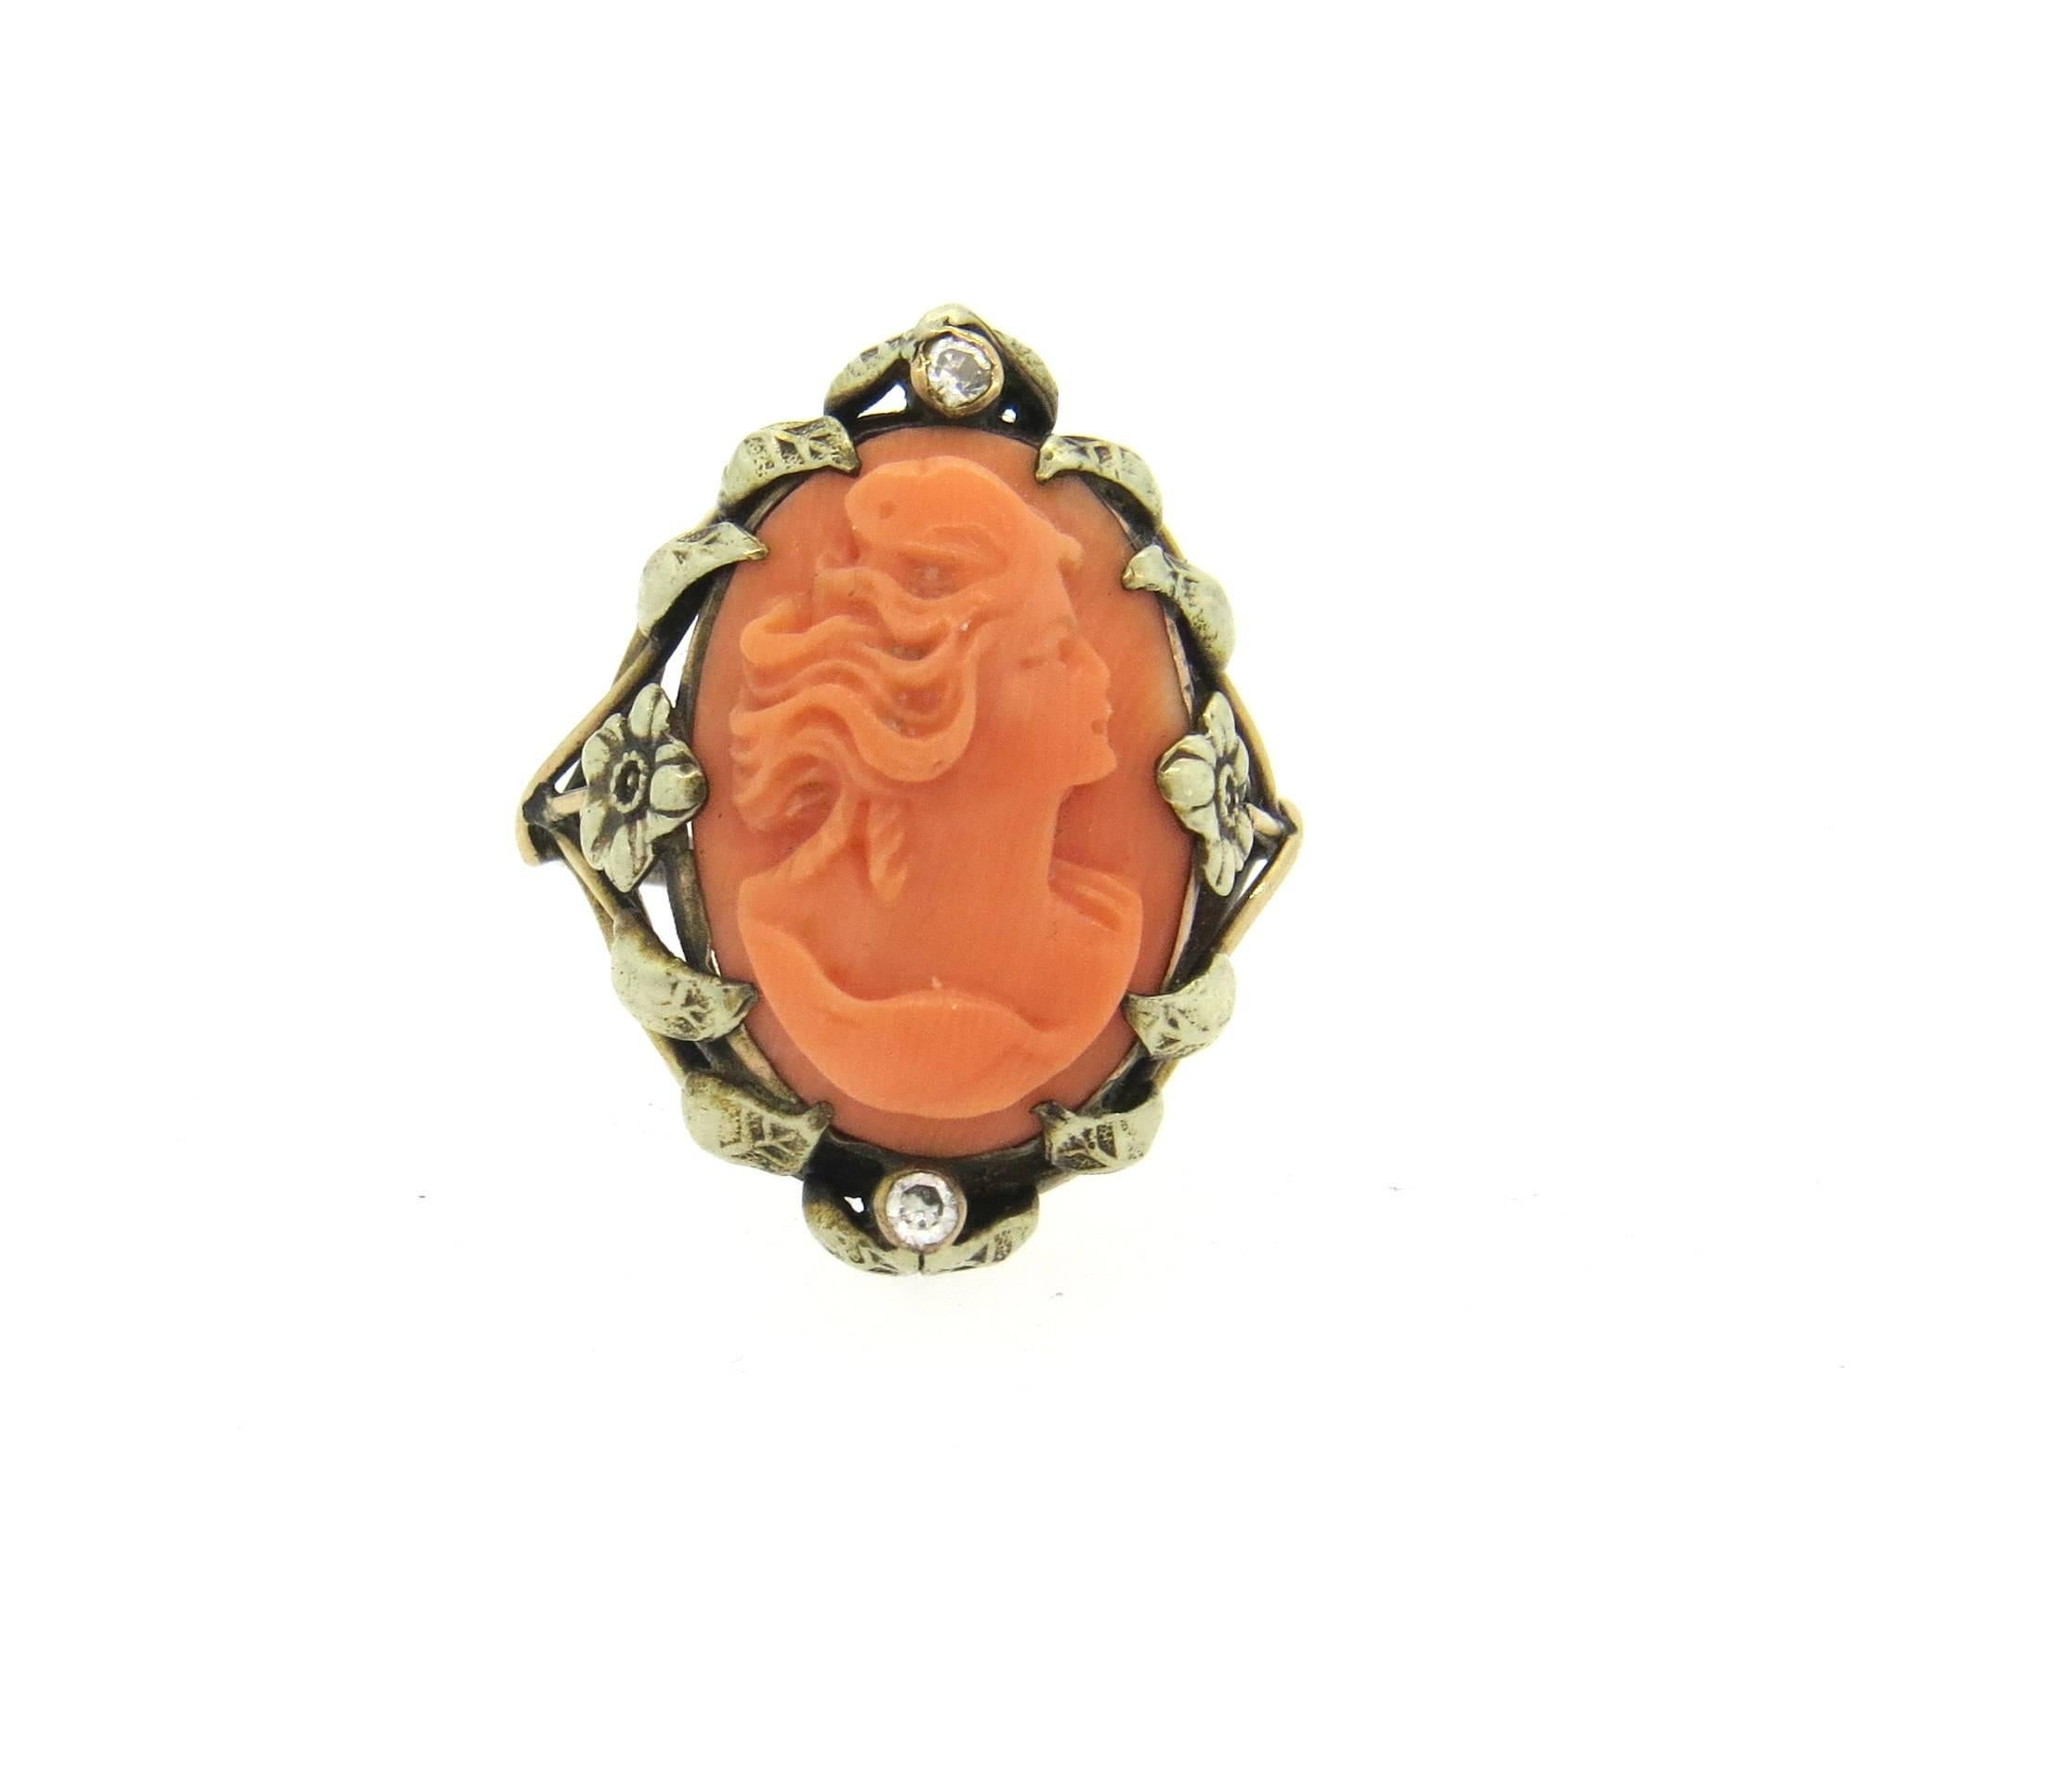 Antique 14k gold ring, set with 18mm x 12mm coral cameo as a centerpiece, surrounded with two diamonds. Ring is a size 5 1/2, ring top is 24mm x 18mm. Weight of the piece - 5.2 grams